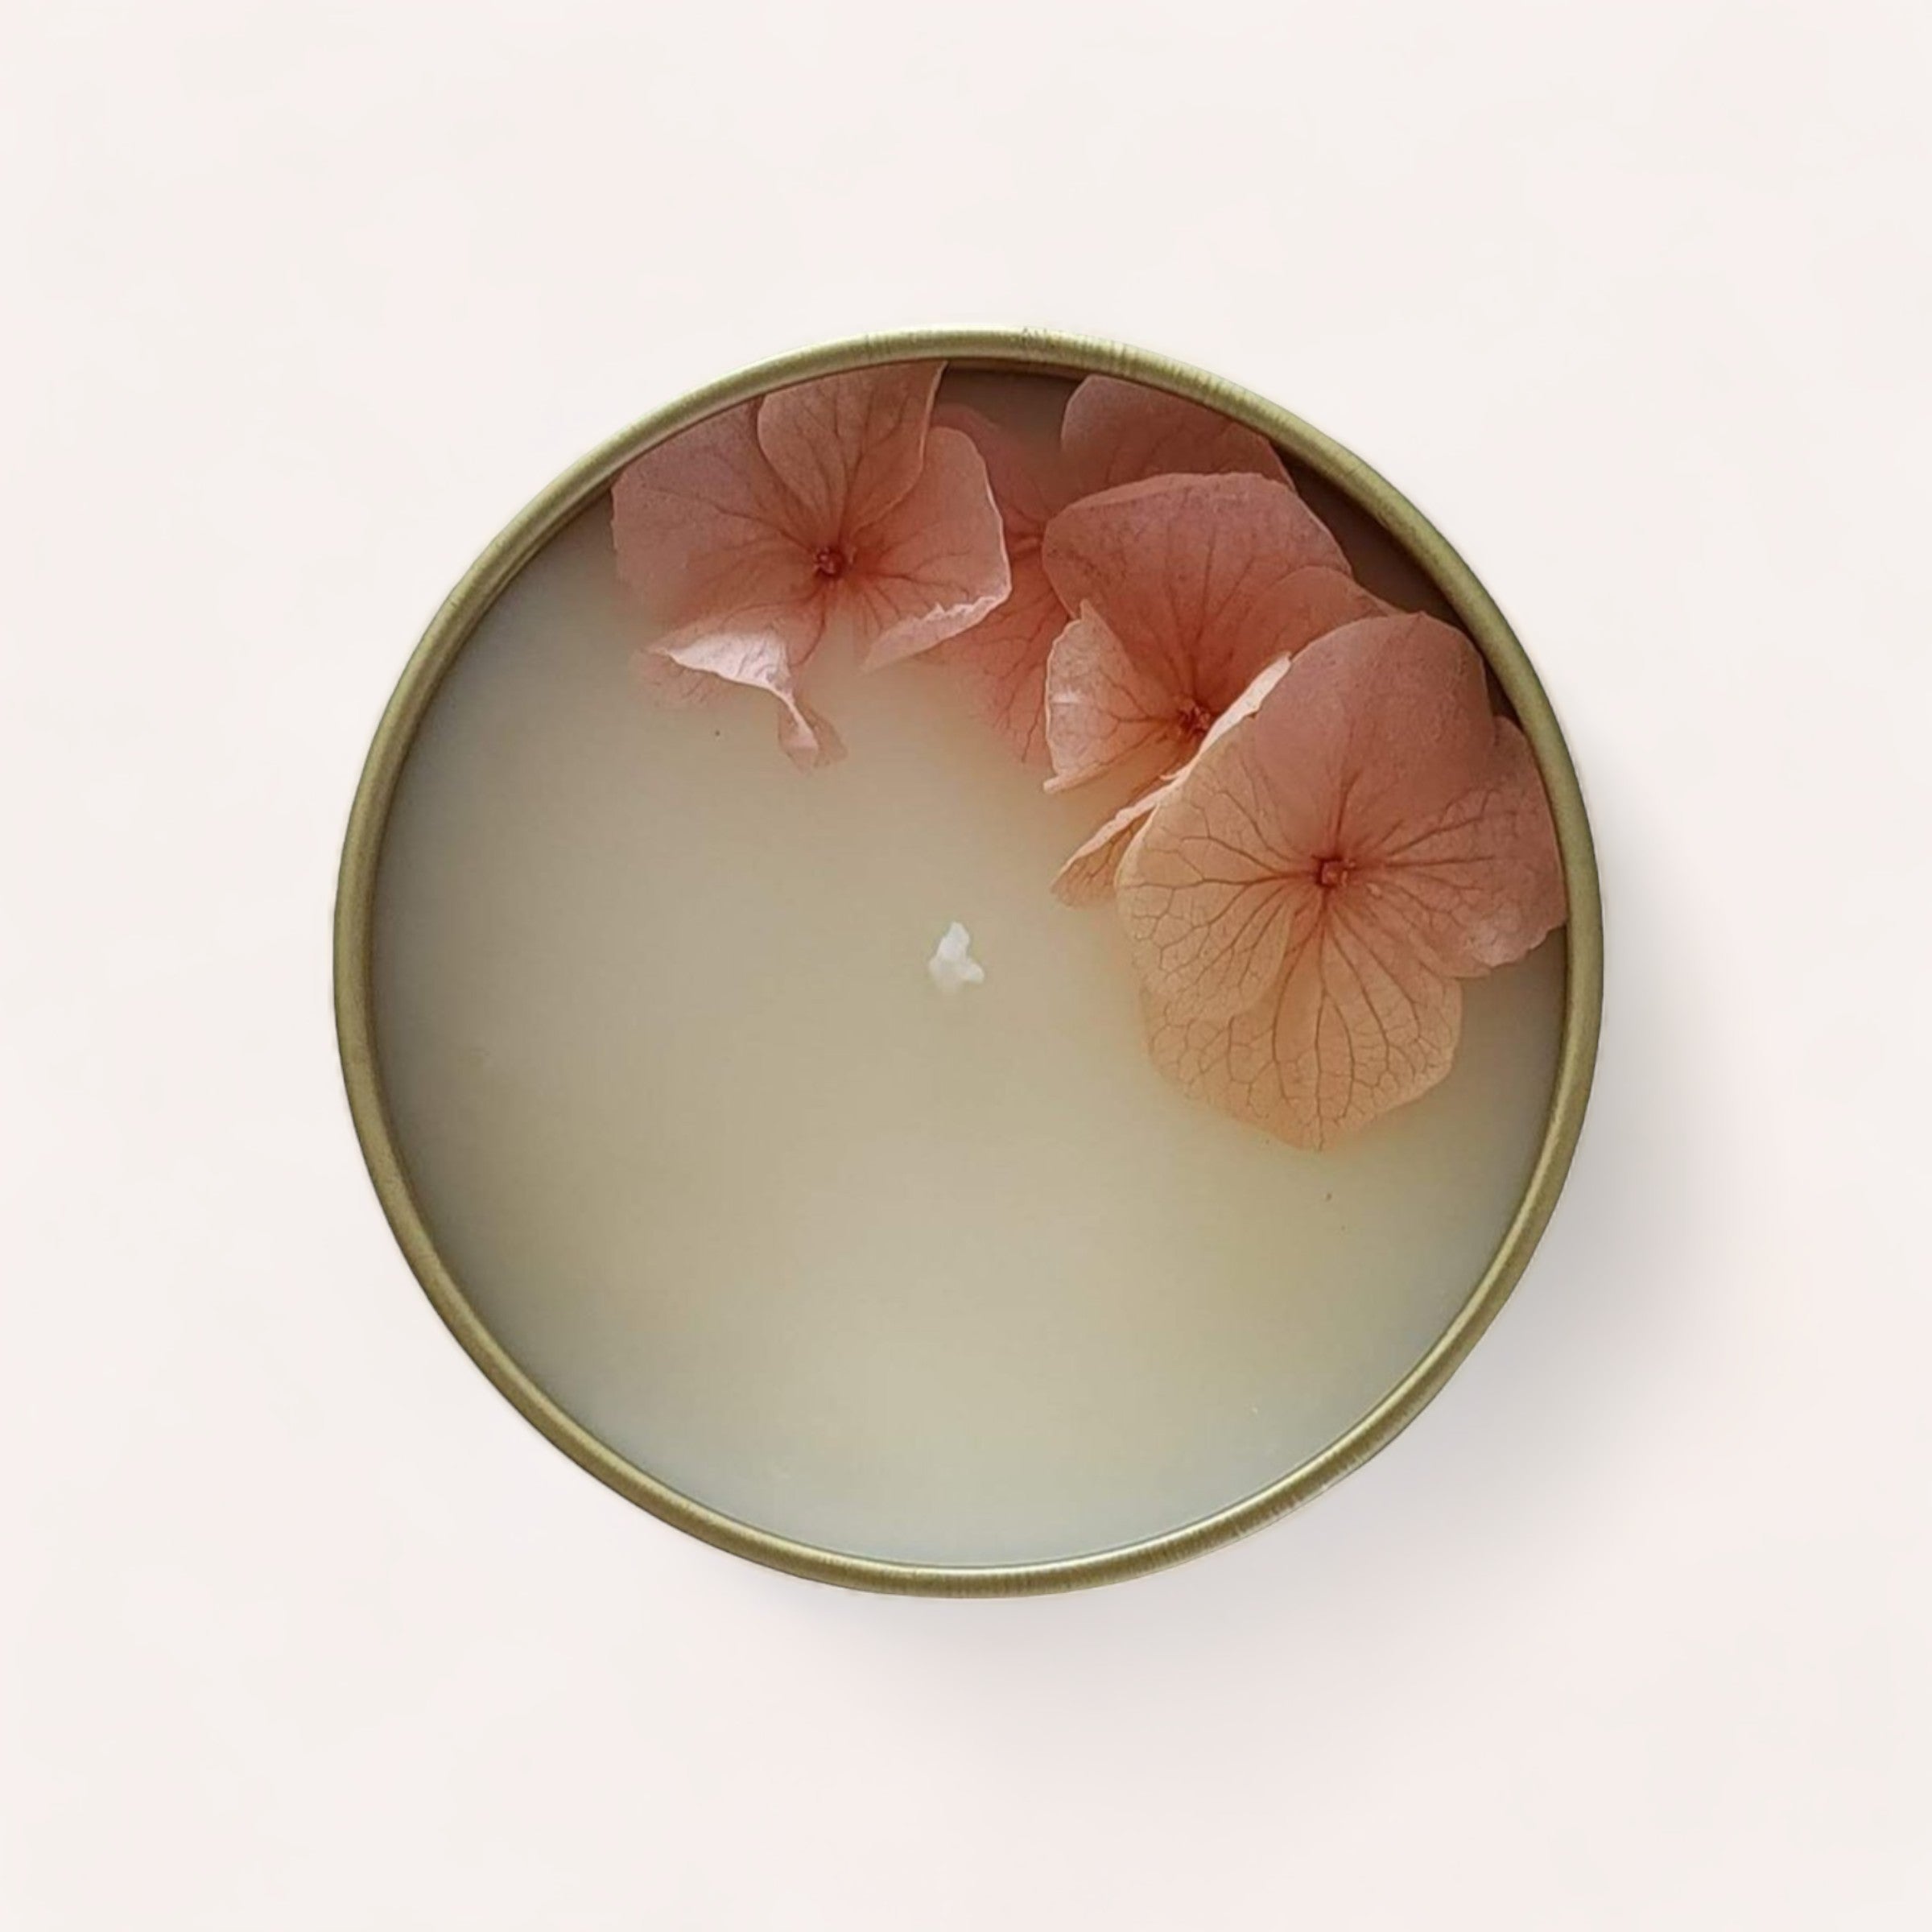 Strawberries + Champagne Candle adorned with delicate pink hydrangea petals on a creamy wax surface, encased in a reusable gold tin, evoking a sense of tranquility and relaxation by Wix's Lane Co.